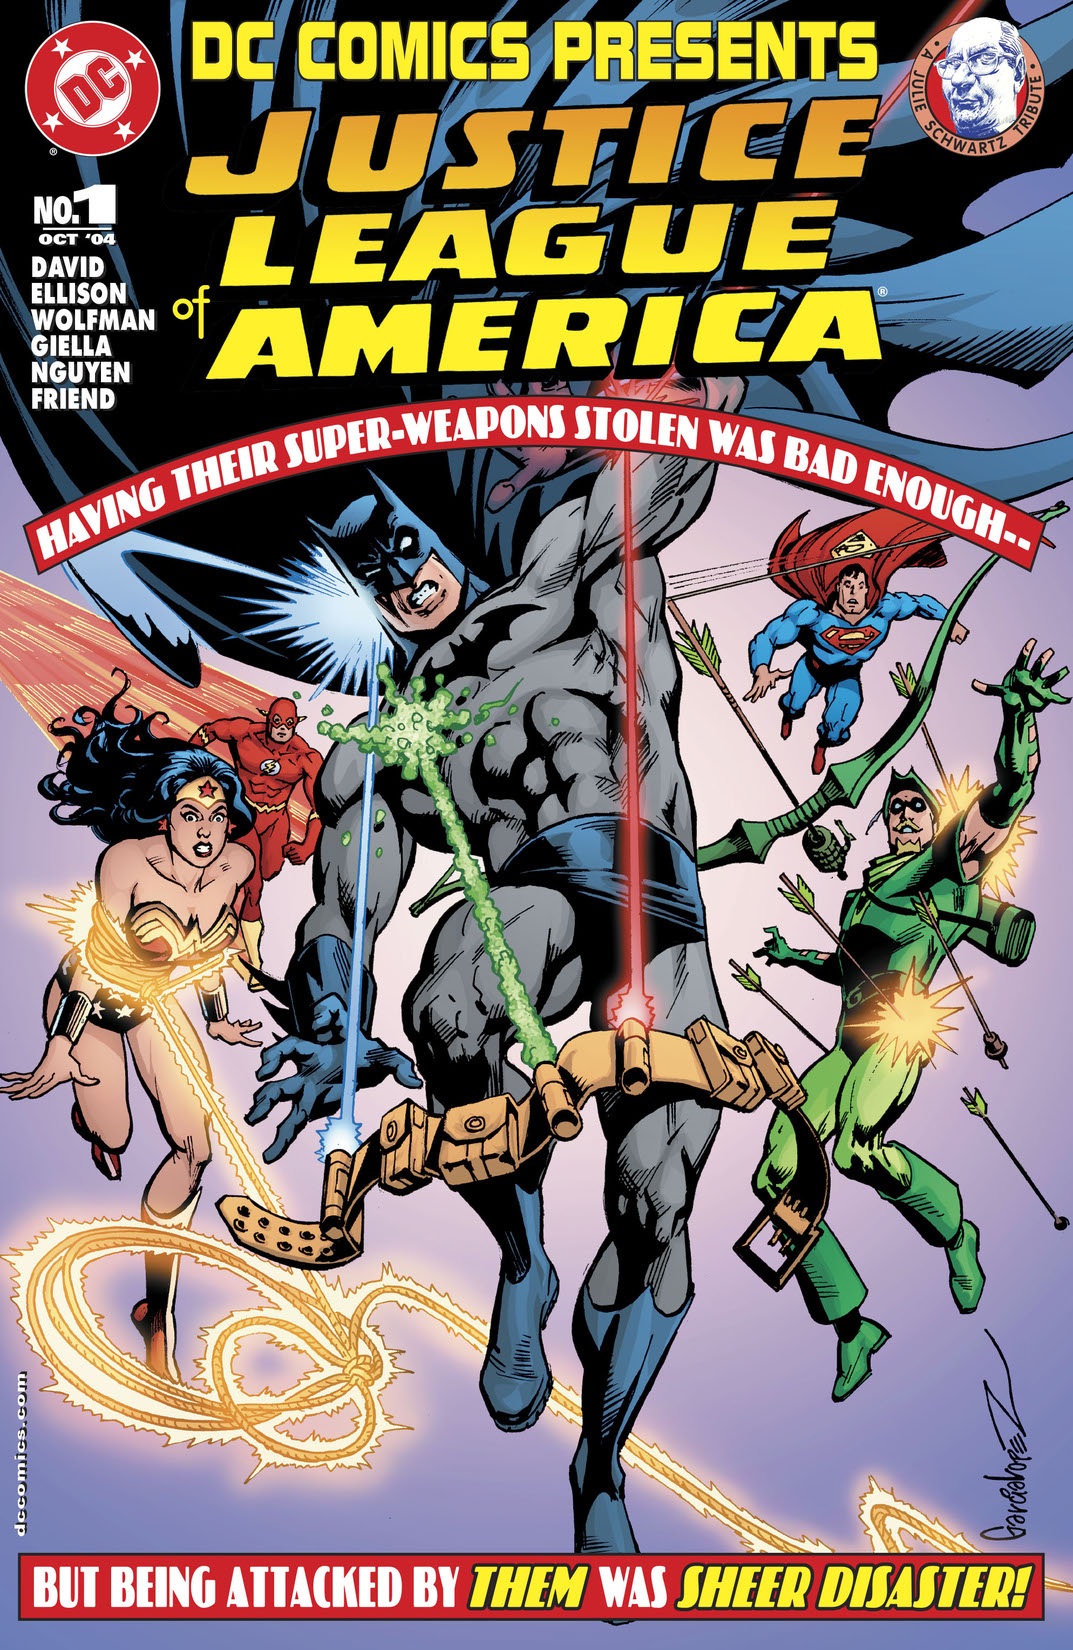 DC Comics Presents: Justice League of America (2004-) #1 preview images